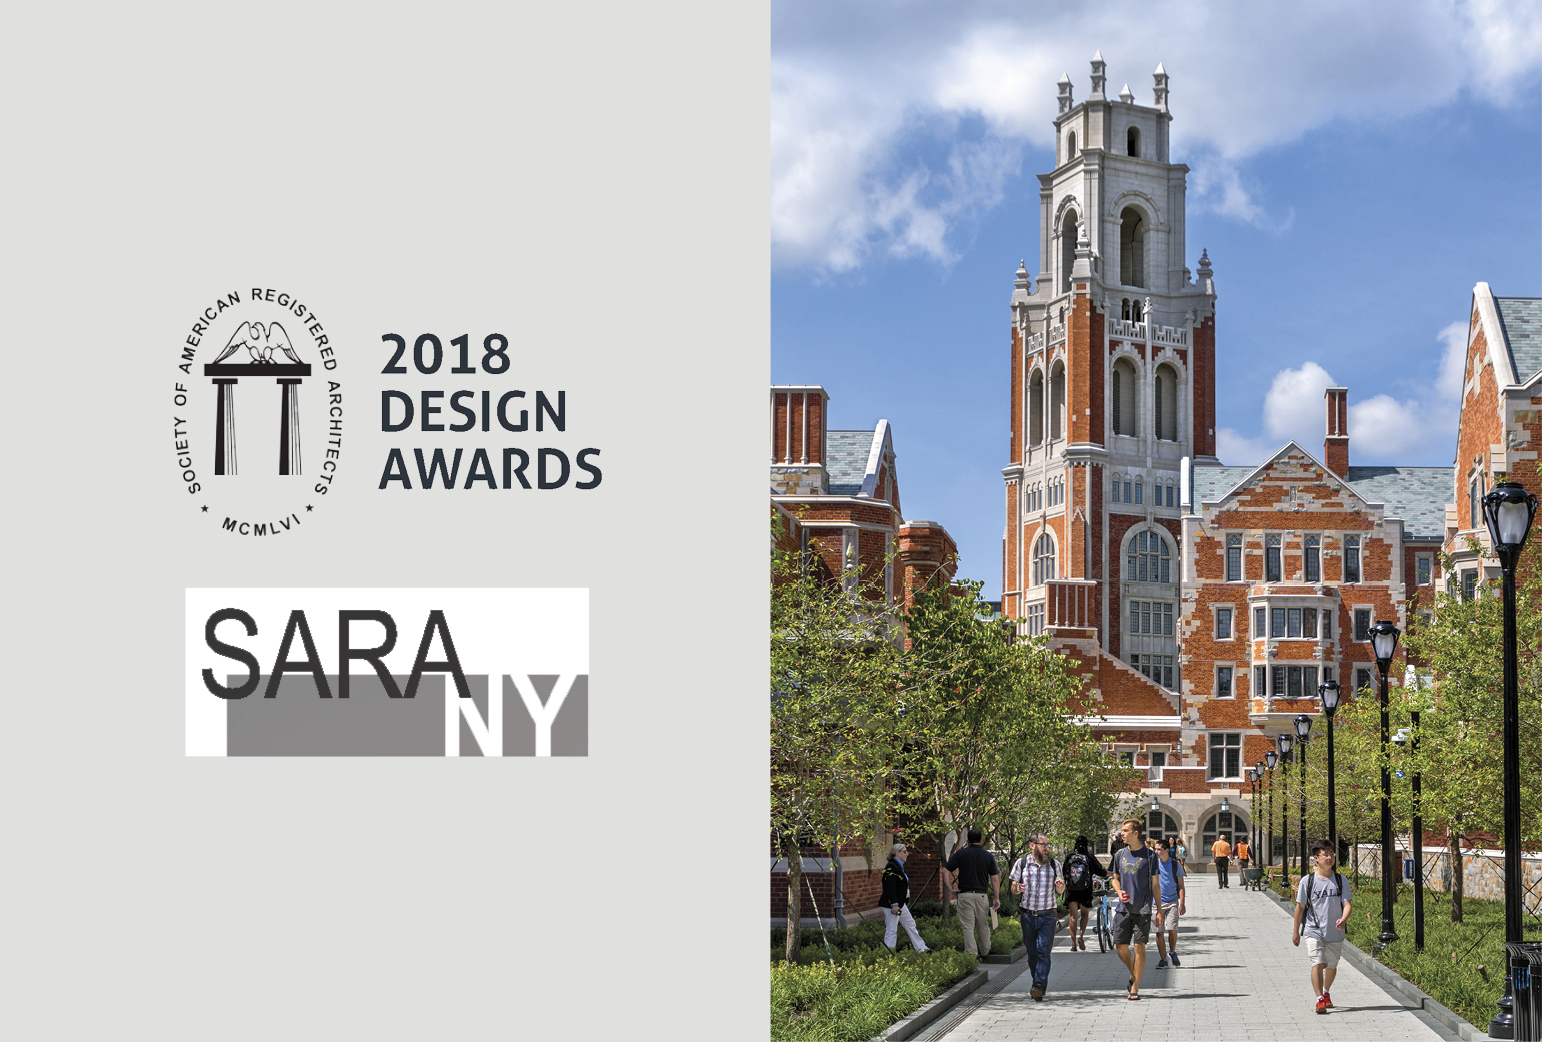 Yale Residential Colleges Win 2018 SARA NY Design Award of Honor